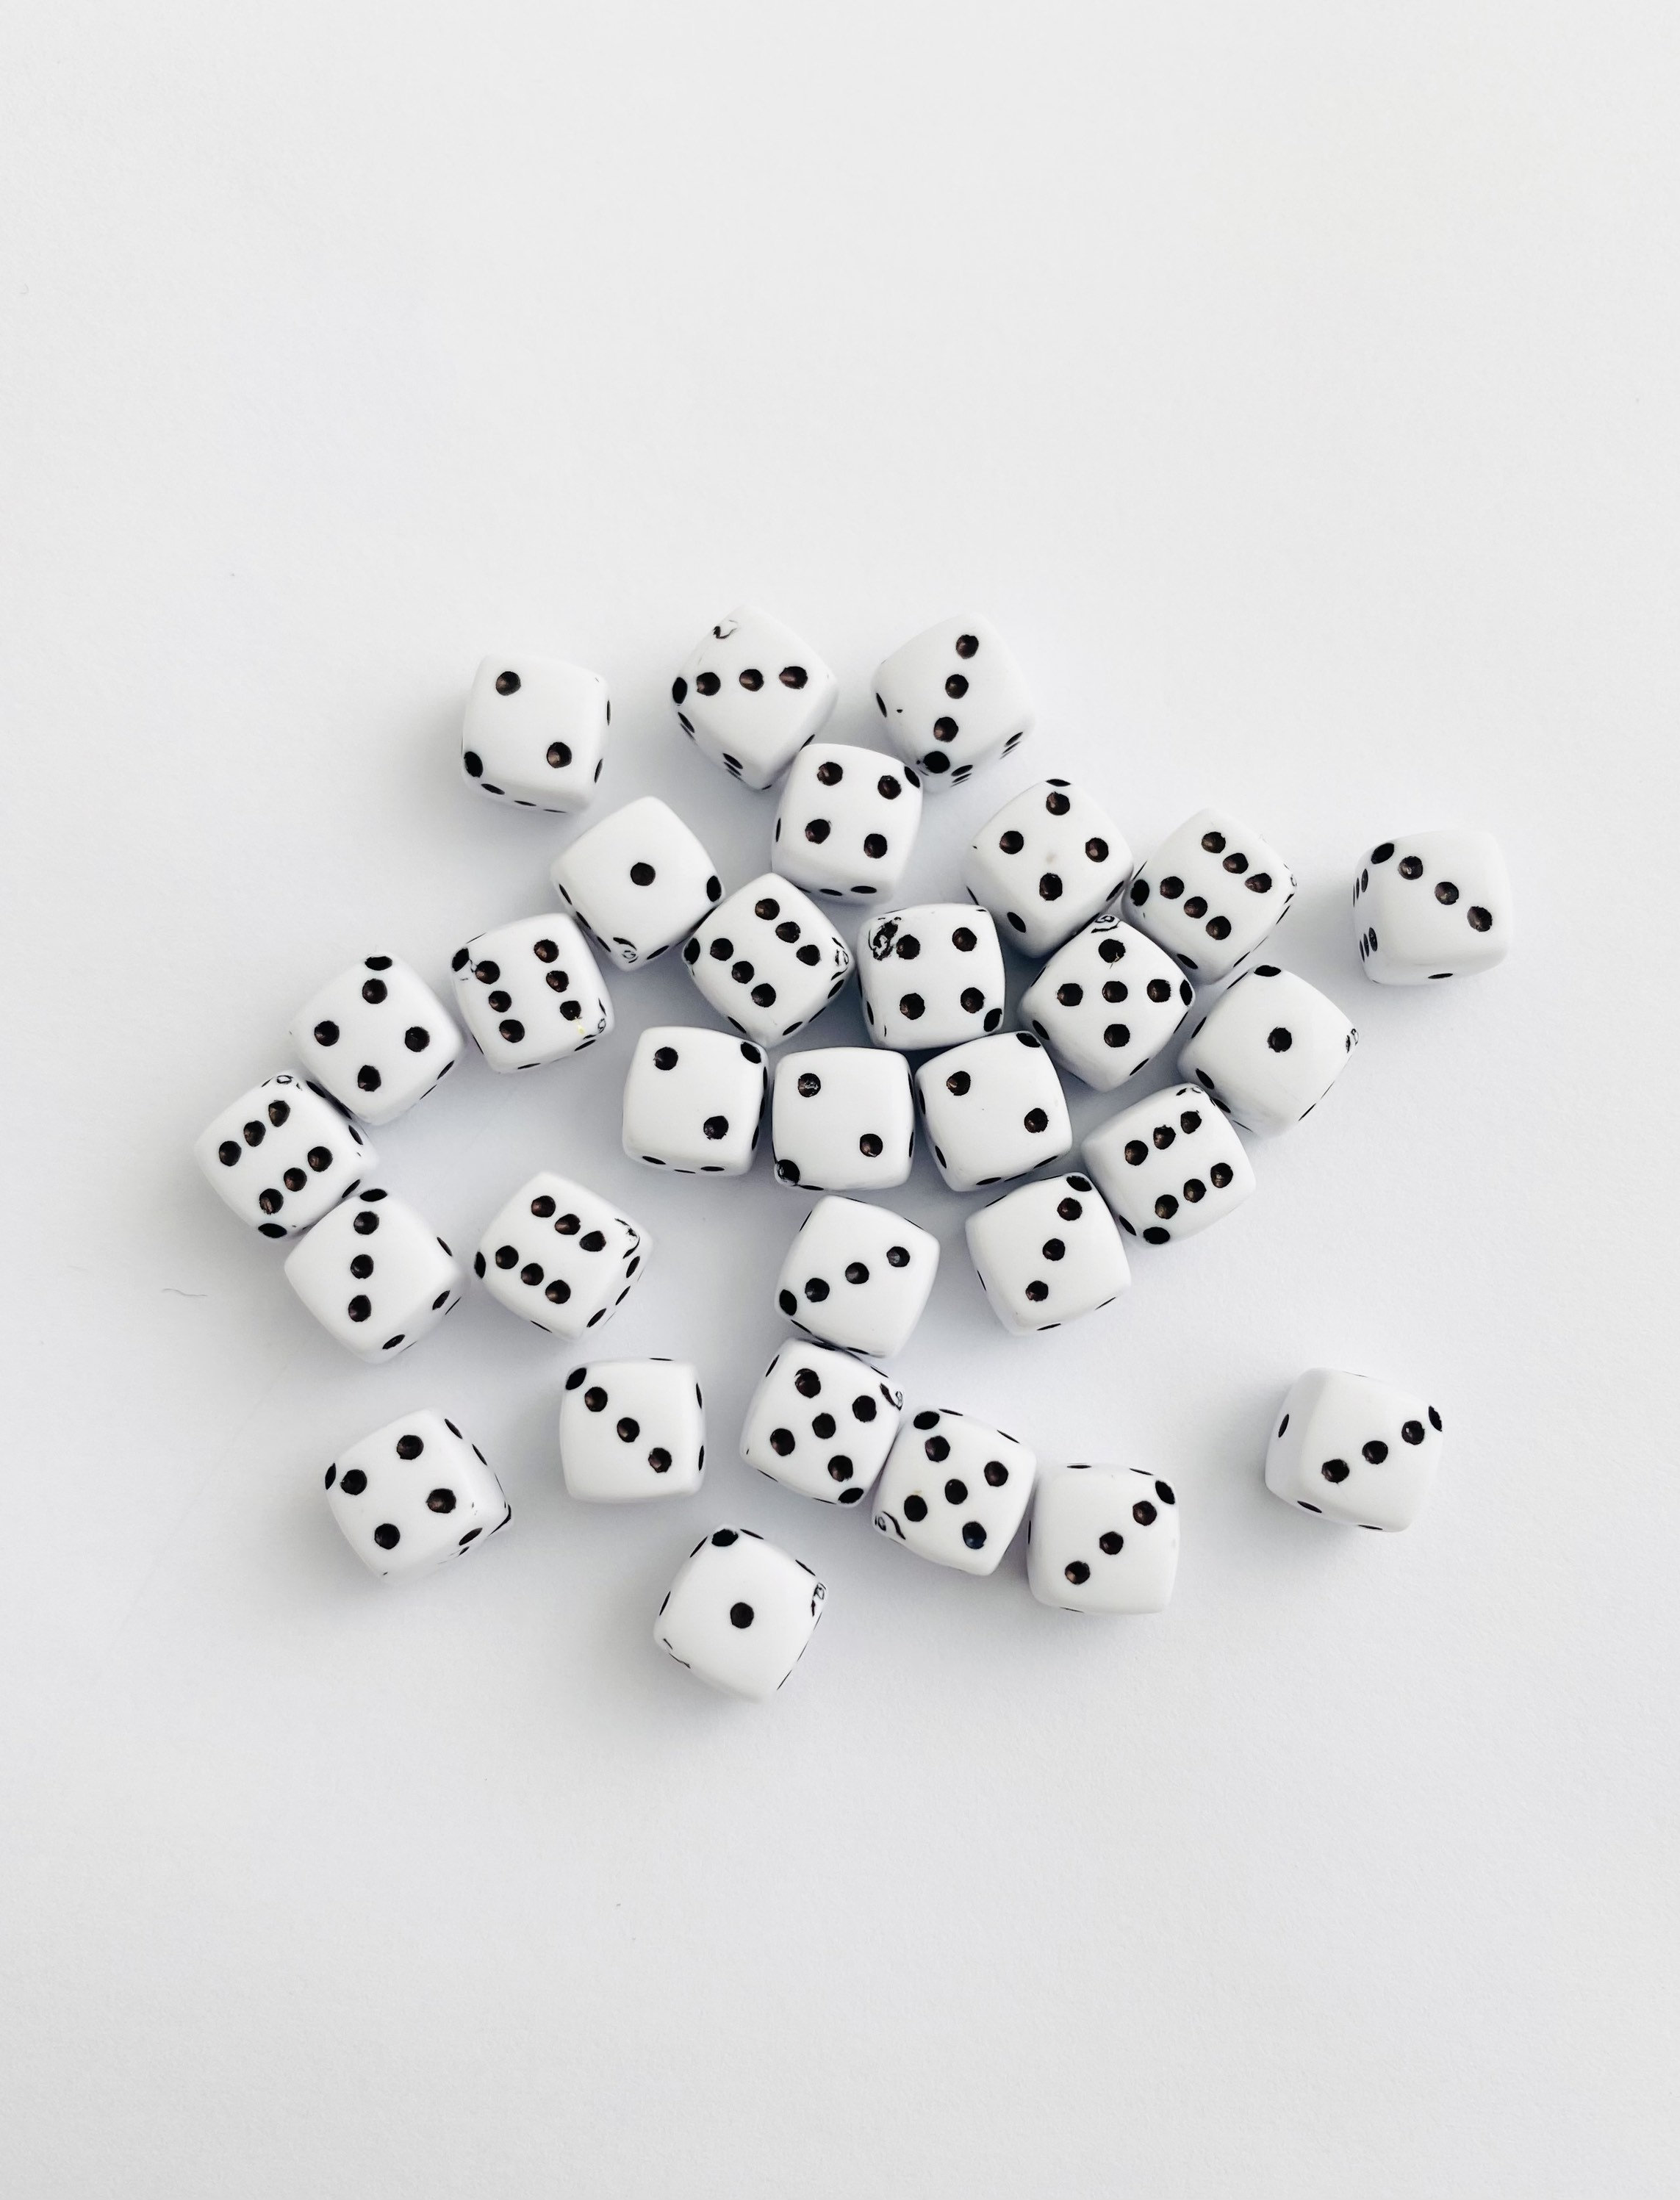 Dunsi 30Pcs/Lot 8 * 8mm Dice Beads Square Shape Acrylic Spaced Beads for  DIY Bracelet Necklace Charms Jewelry Making Accessories - (Color: White 02